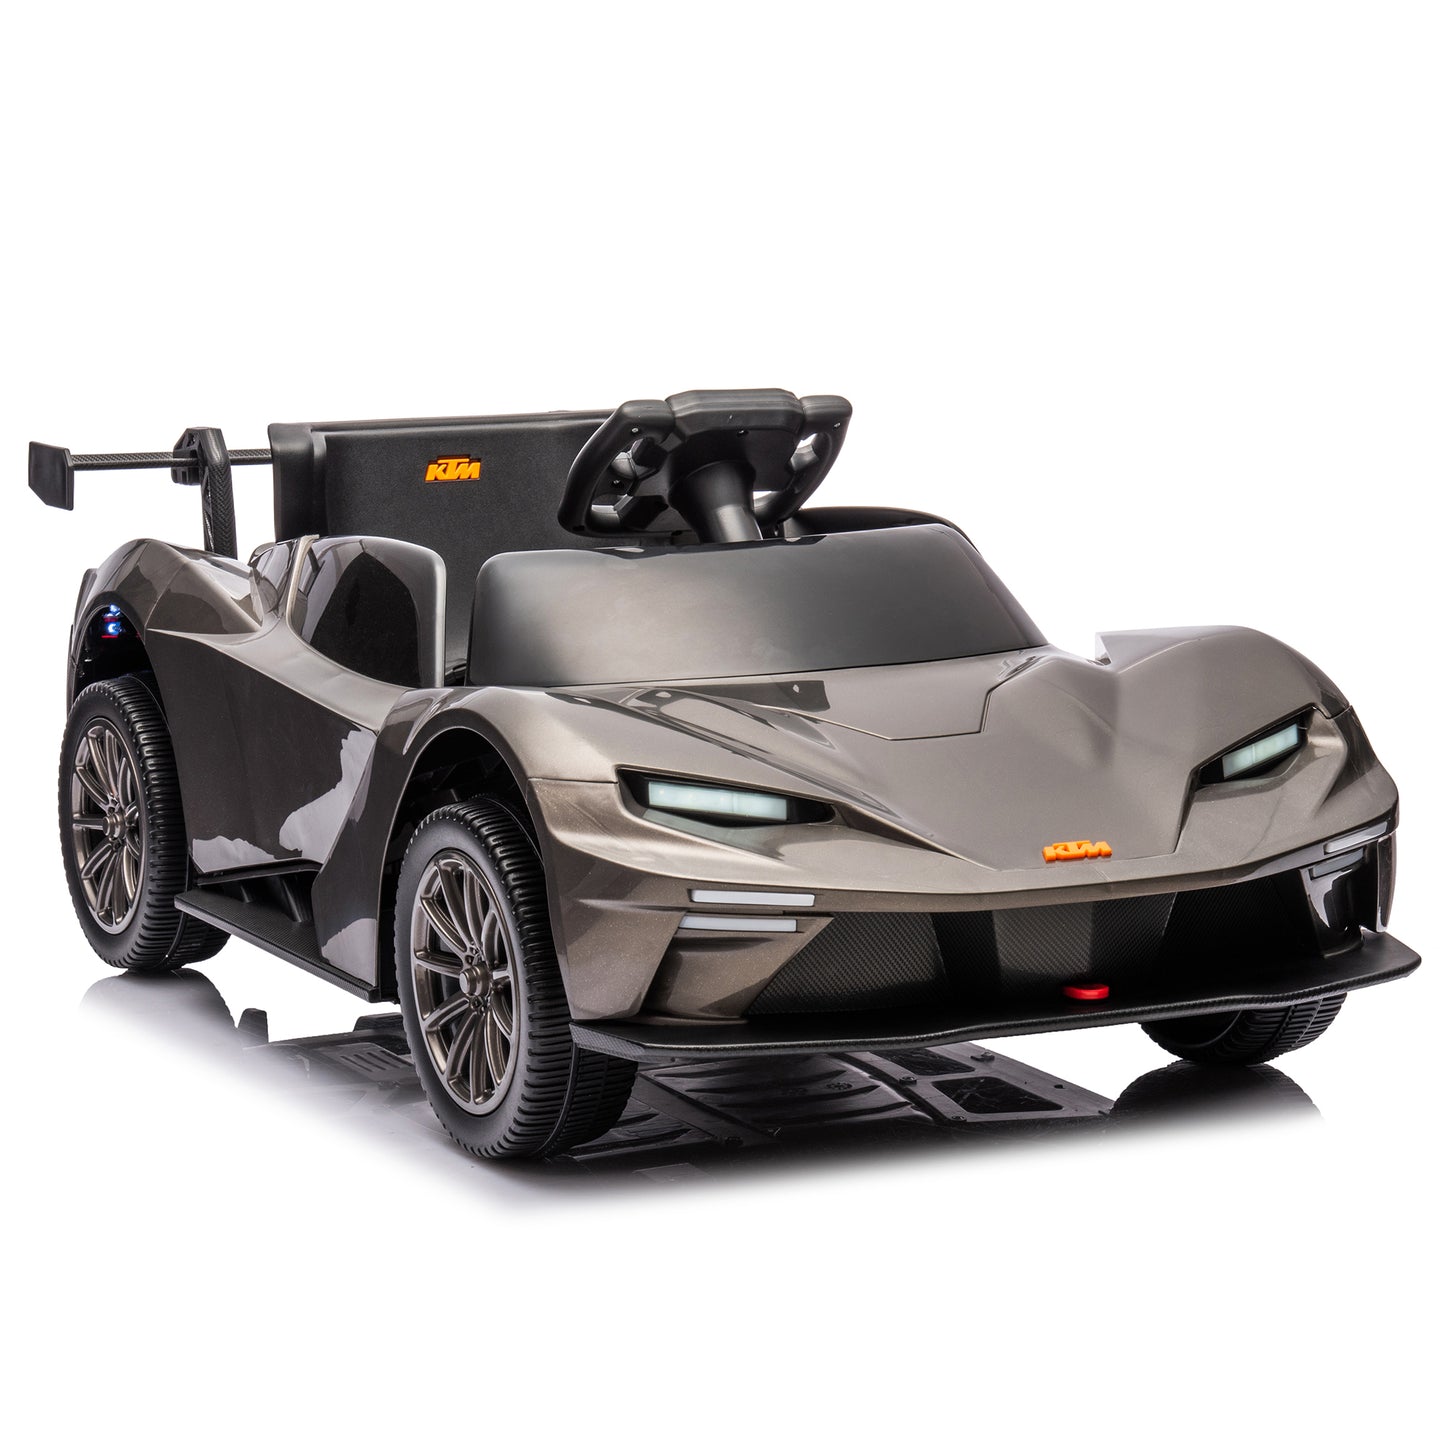 Licensed KTM x BOW GTX,12v7A Kids ride on car 2.4G W/Parents Remote Control, Electric car for kids, Three speed adjustable, Power display, USB,MP3 ,Bluetooth, LED light, Two-point safety belt